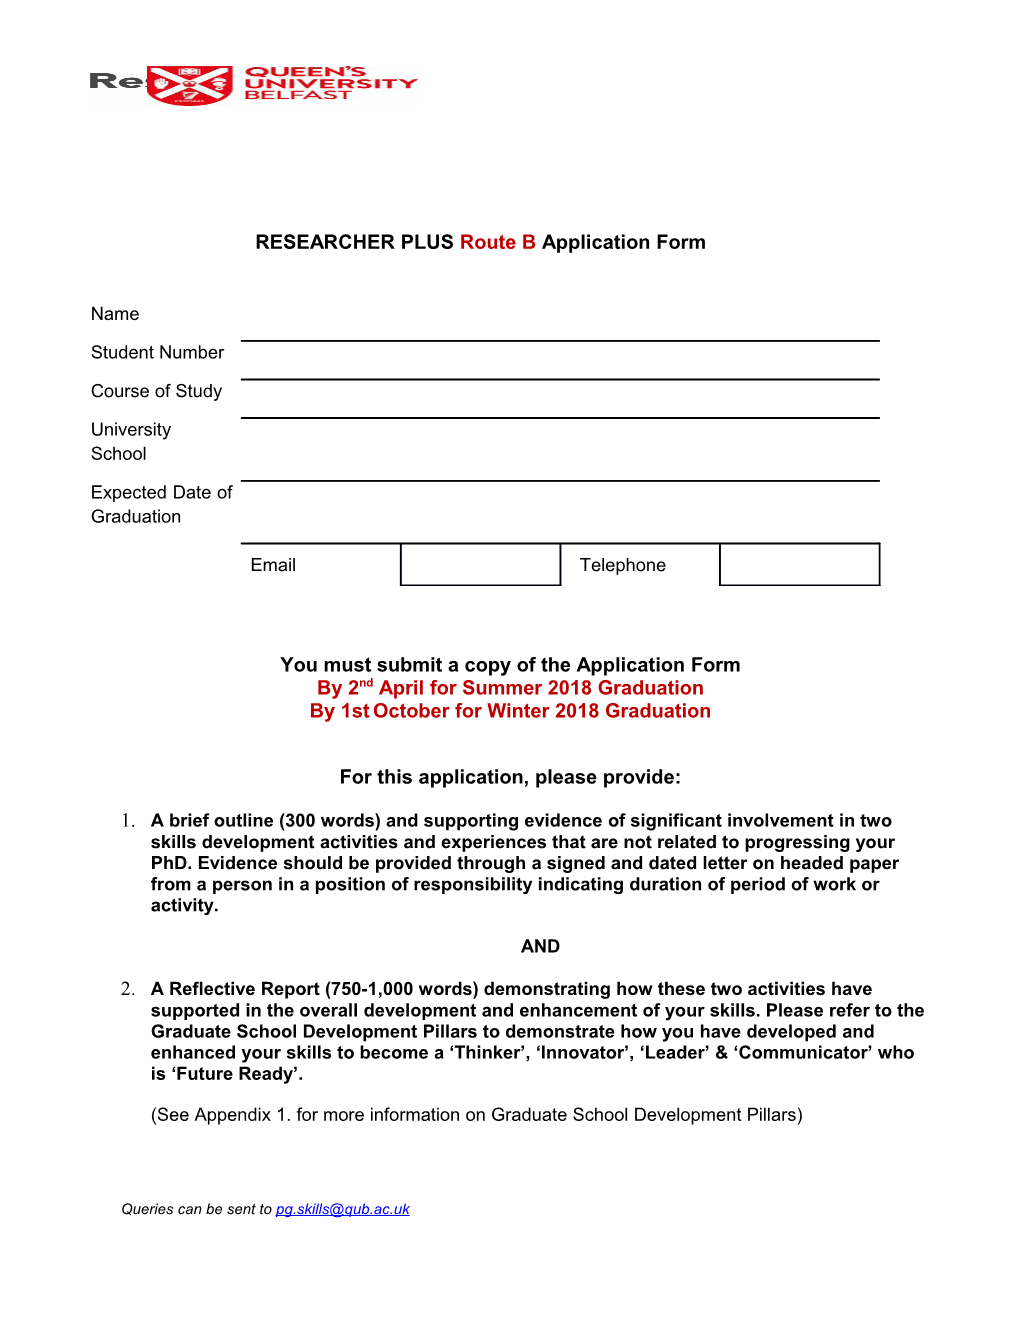 You Must Submit a Copy of the Application Form